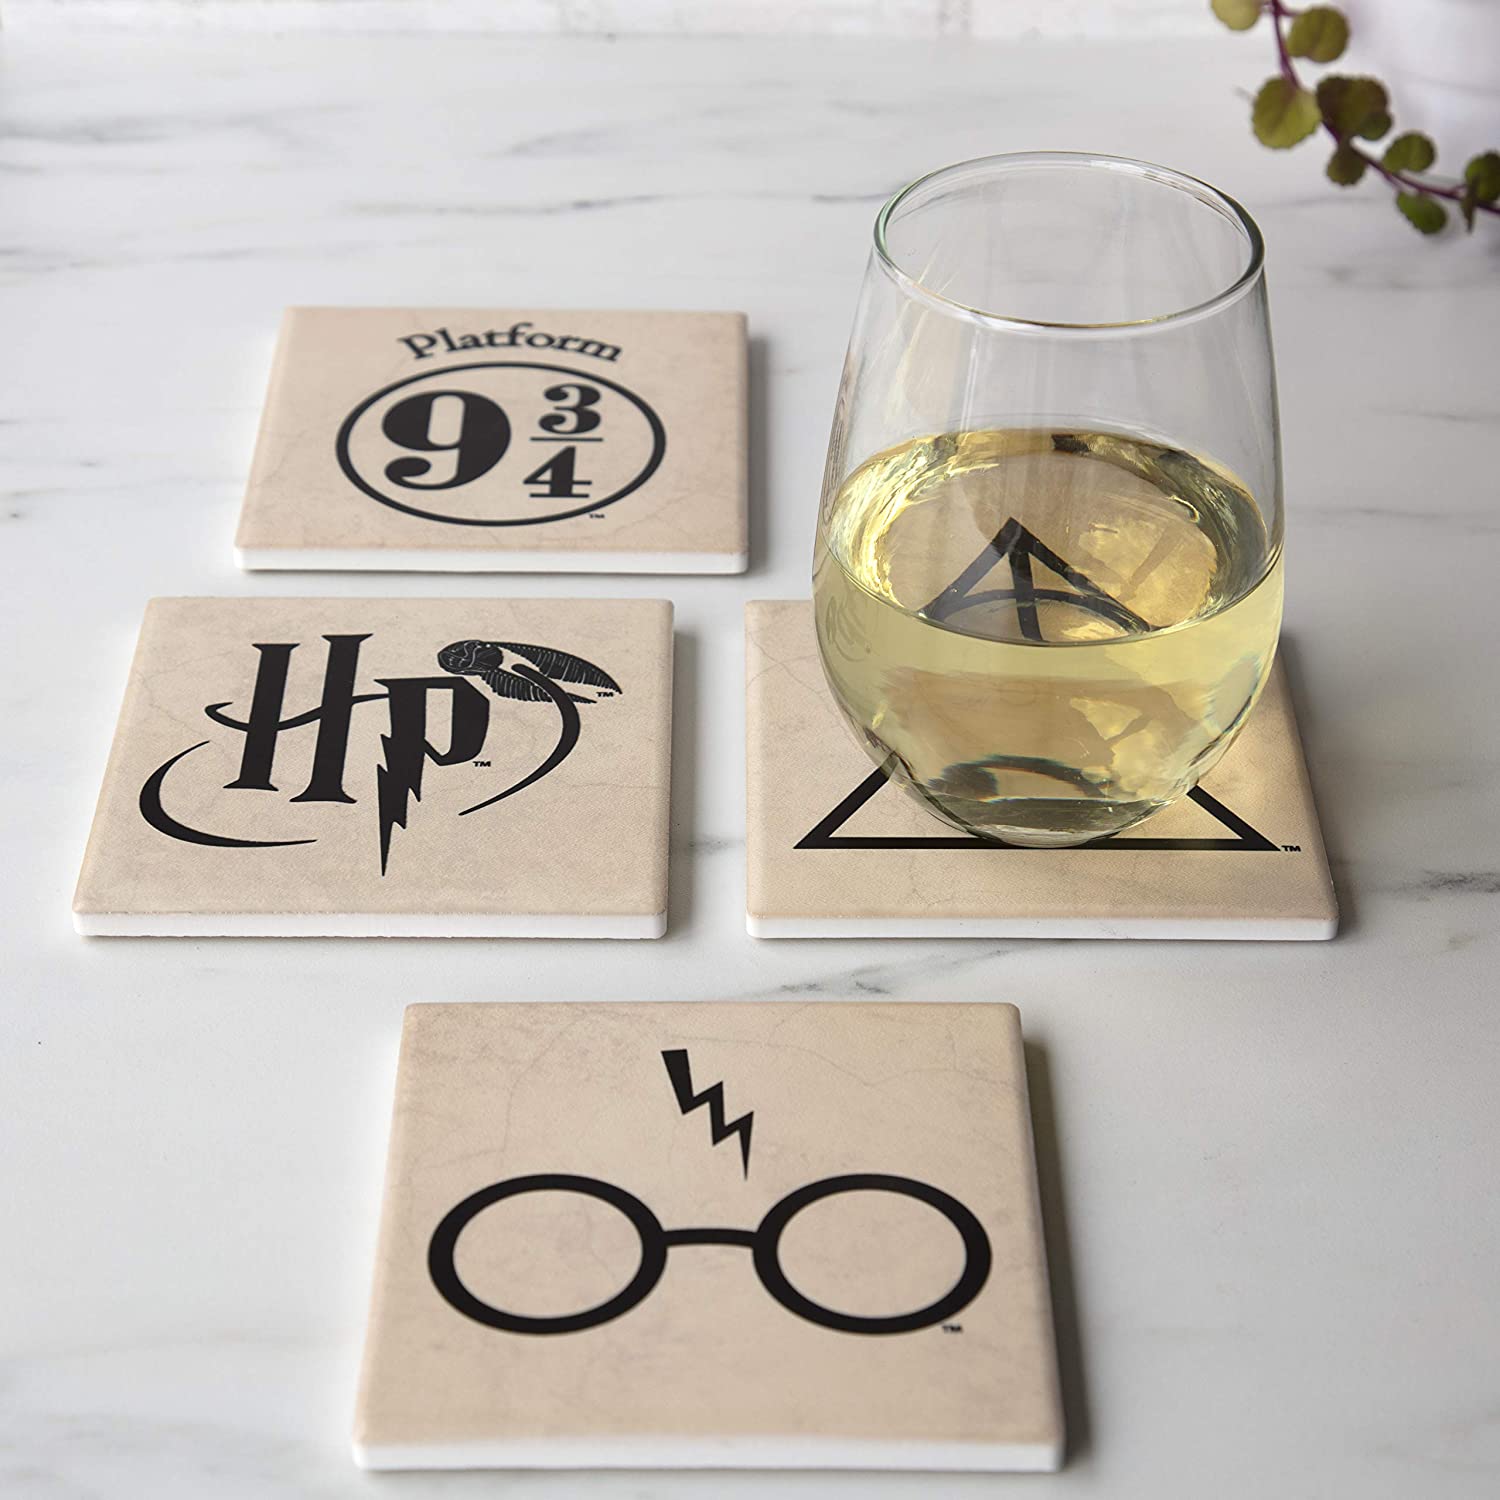 21-Fun-Harry-Potter-Gifts-for-a-Wonderful-Wizarding-Wedding-coasters